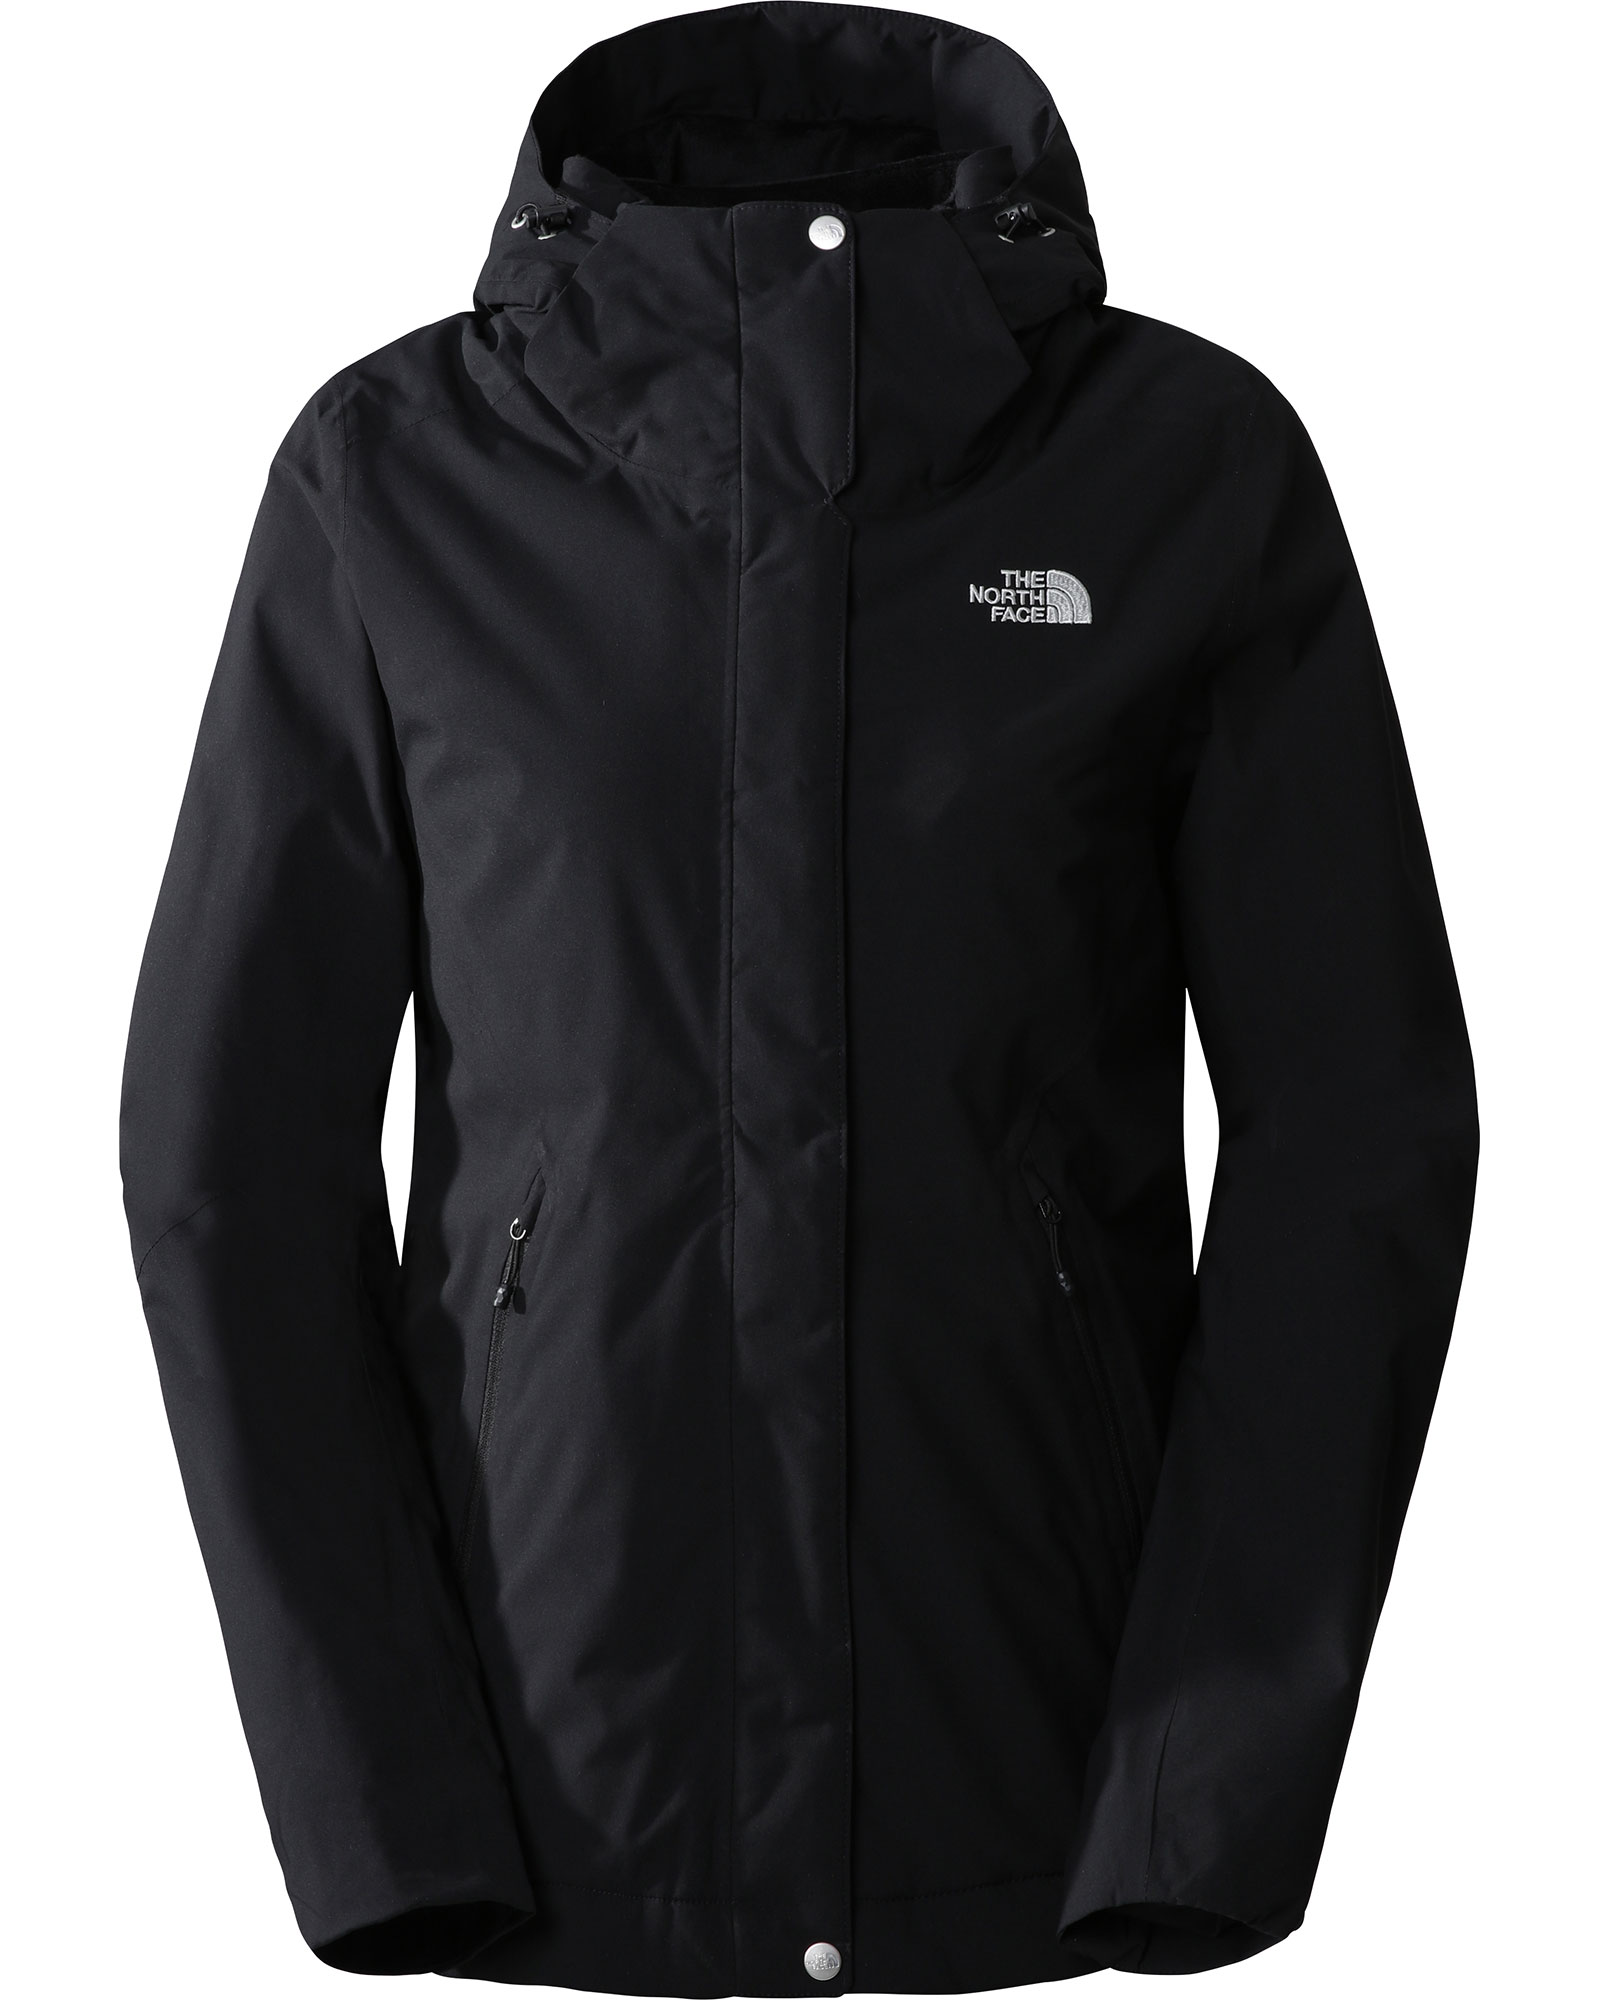 The North Face Inlux Insulated DryVent Women’s Insulated Jacket - TNF Black M